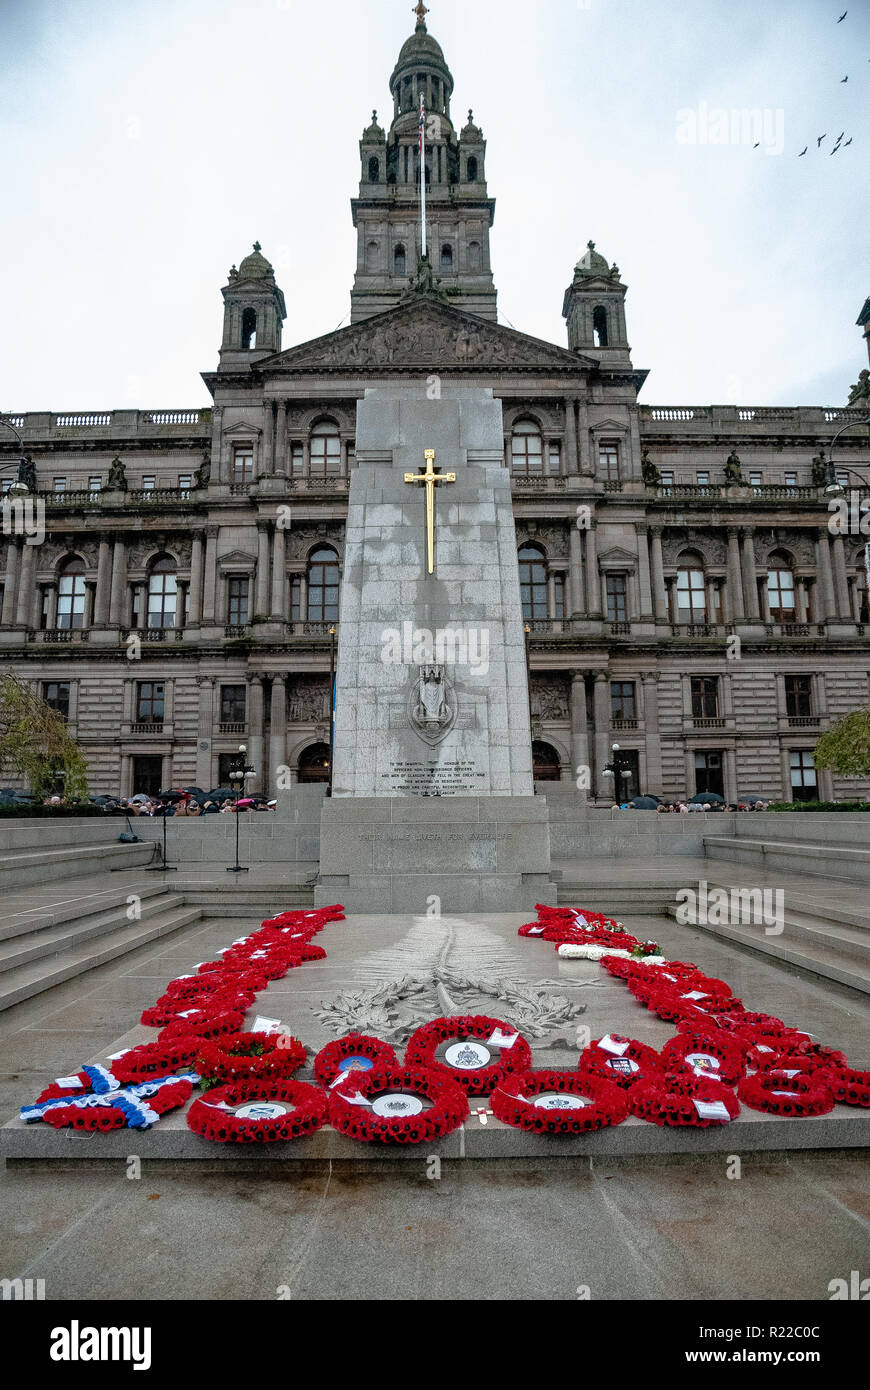 An overview of the Cenotaph after the procession with wreaths seen lying at the base.  Members of the UK armed forces, Police Scotland, Public and other services came out in support and to pay respects to those that have fallen in recent conflicts and to those that fell during the Great War. 2018 marked the 100th Year anniversary of WW1. Stock Photo